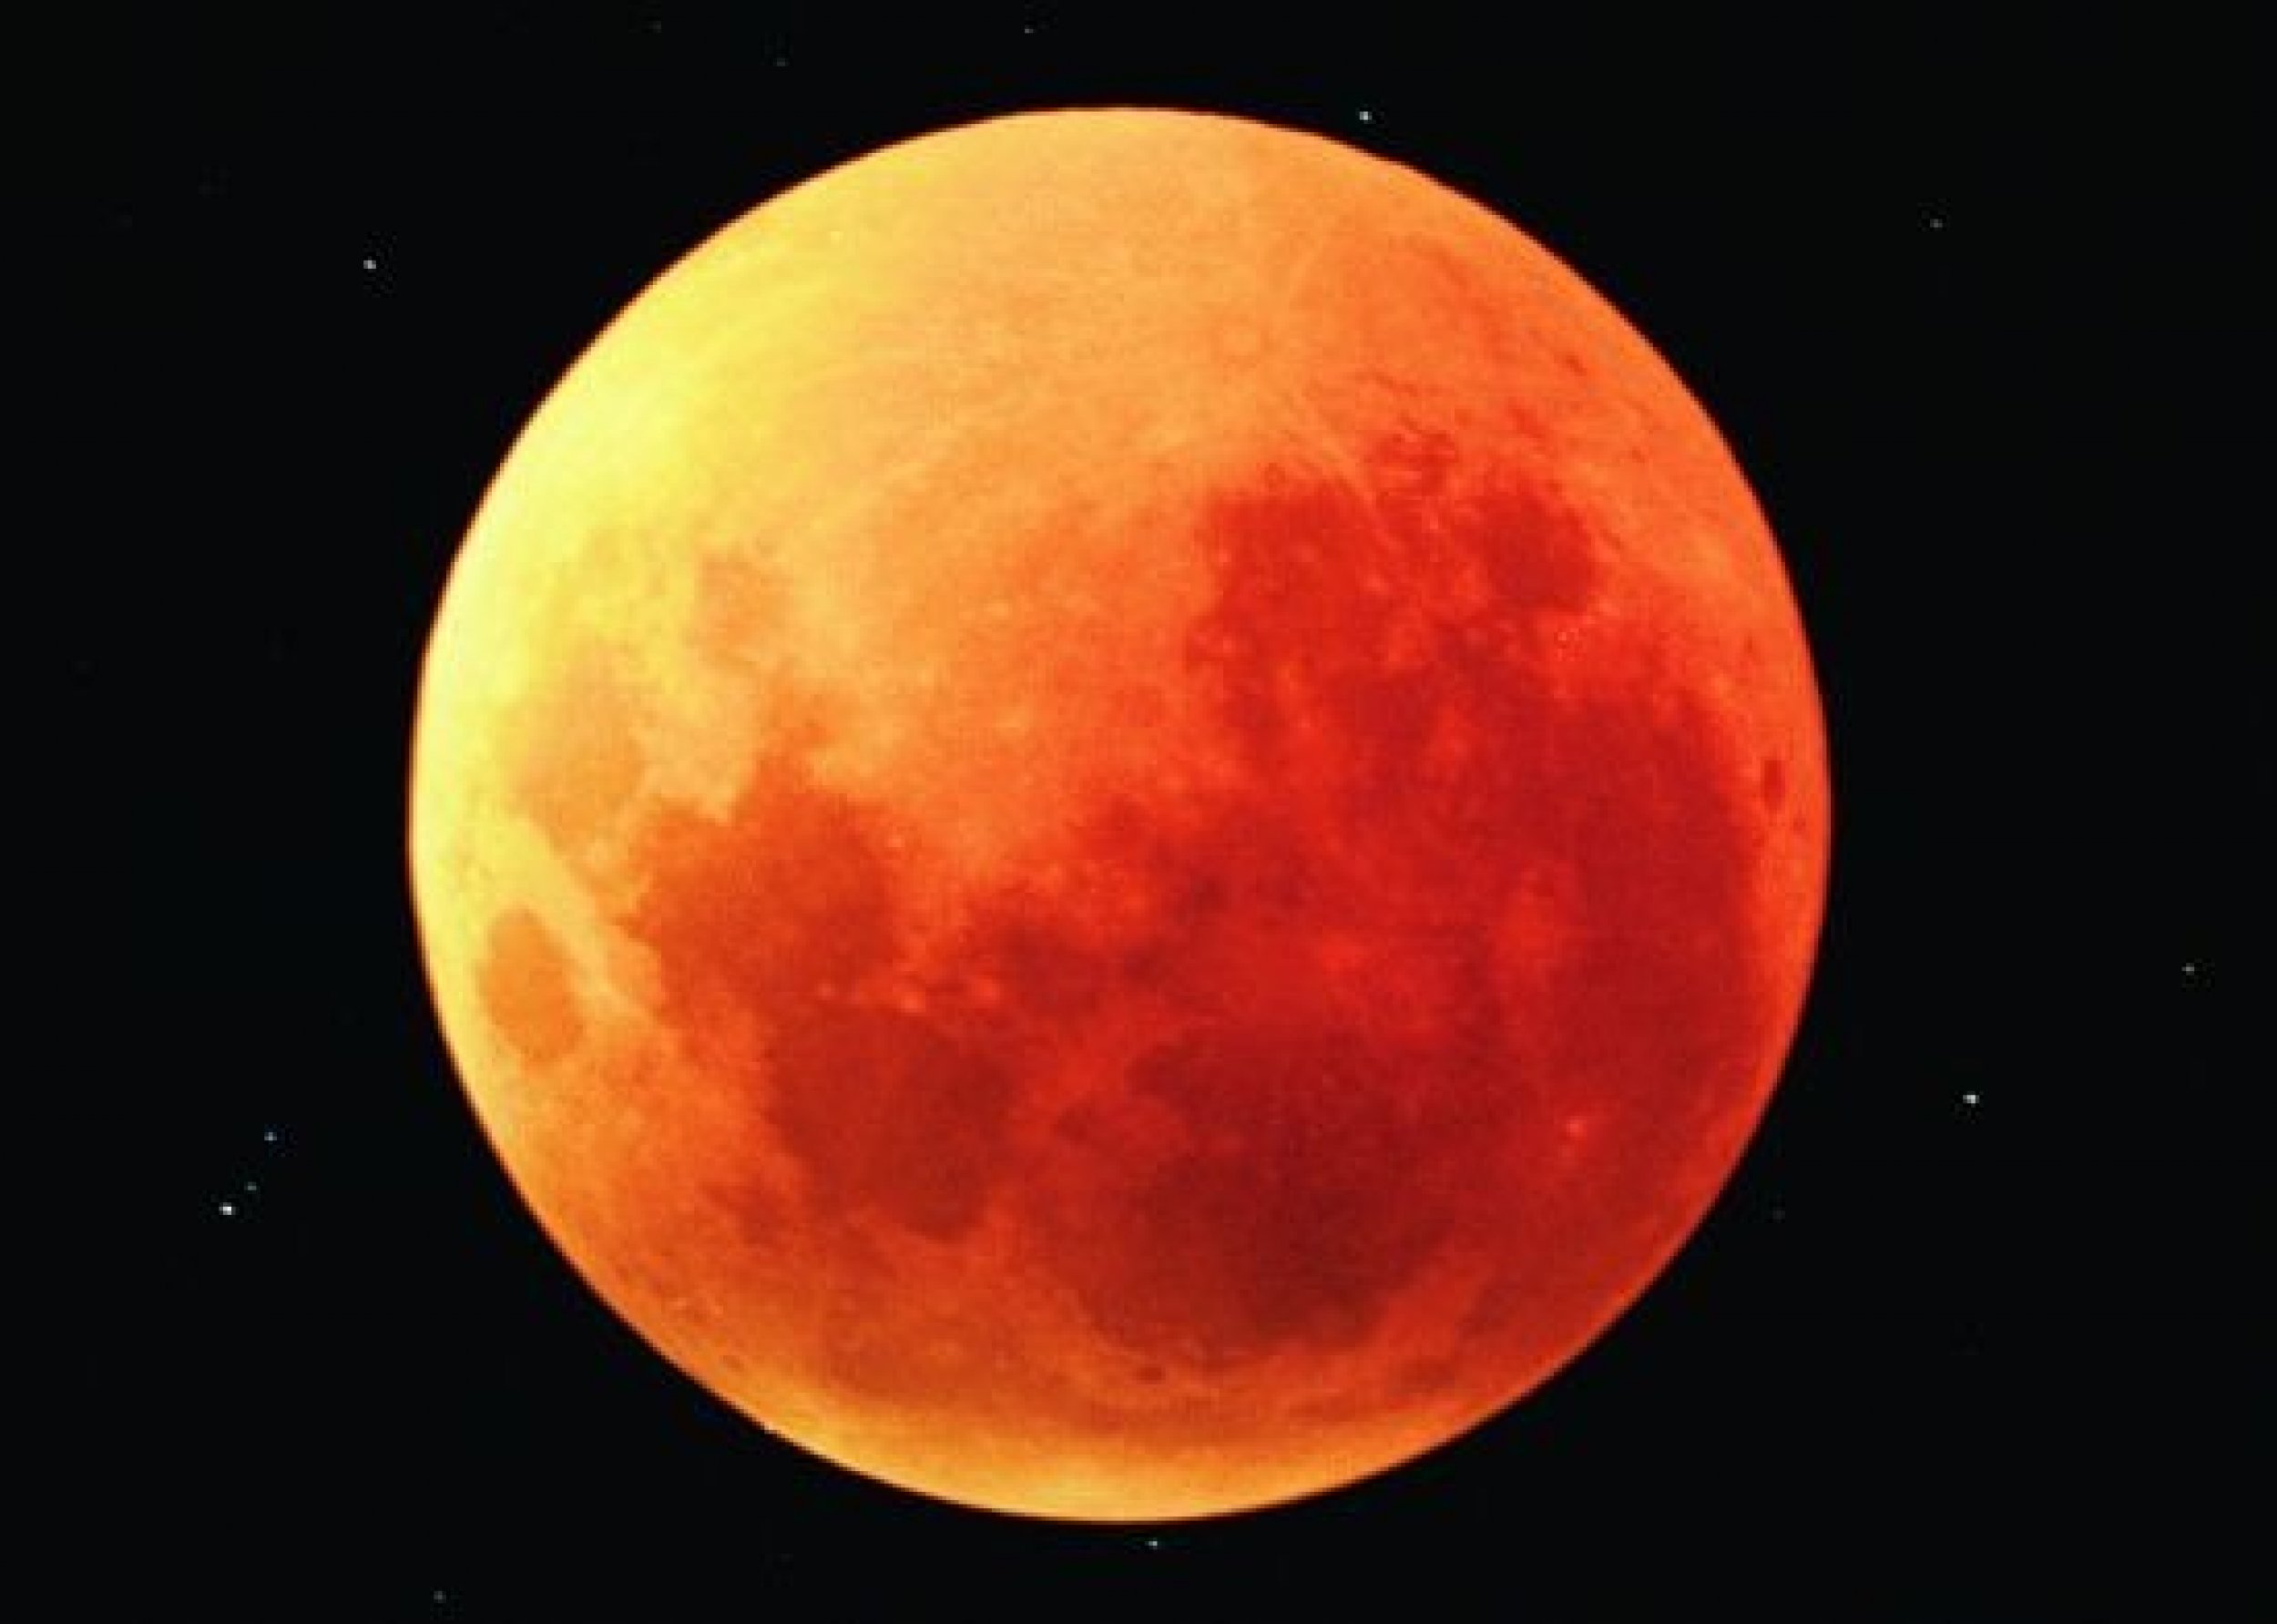 Scientists Red lunar eclipse due to volcanic ashes